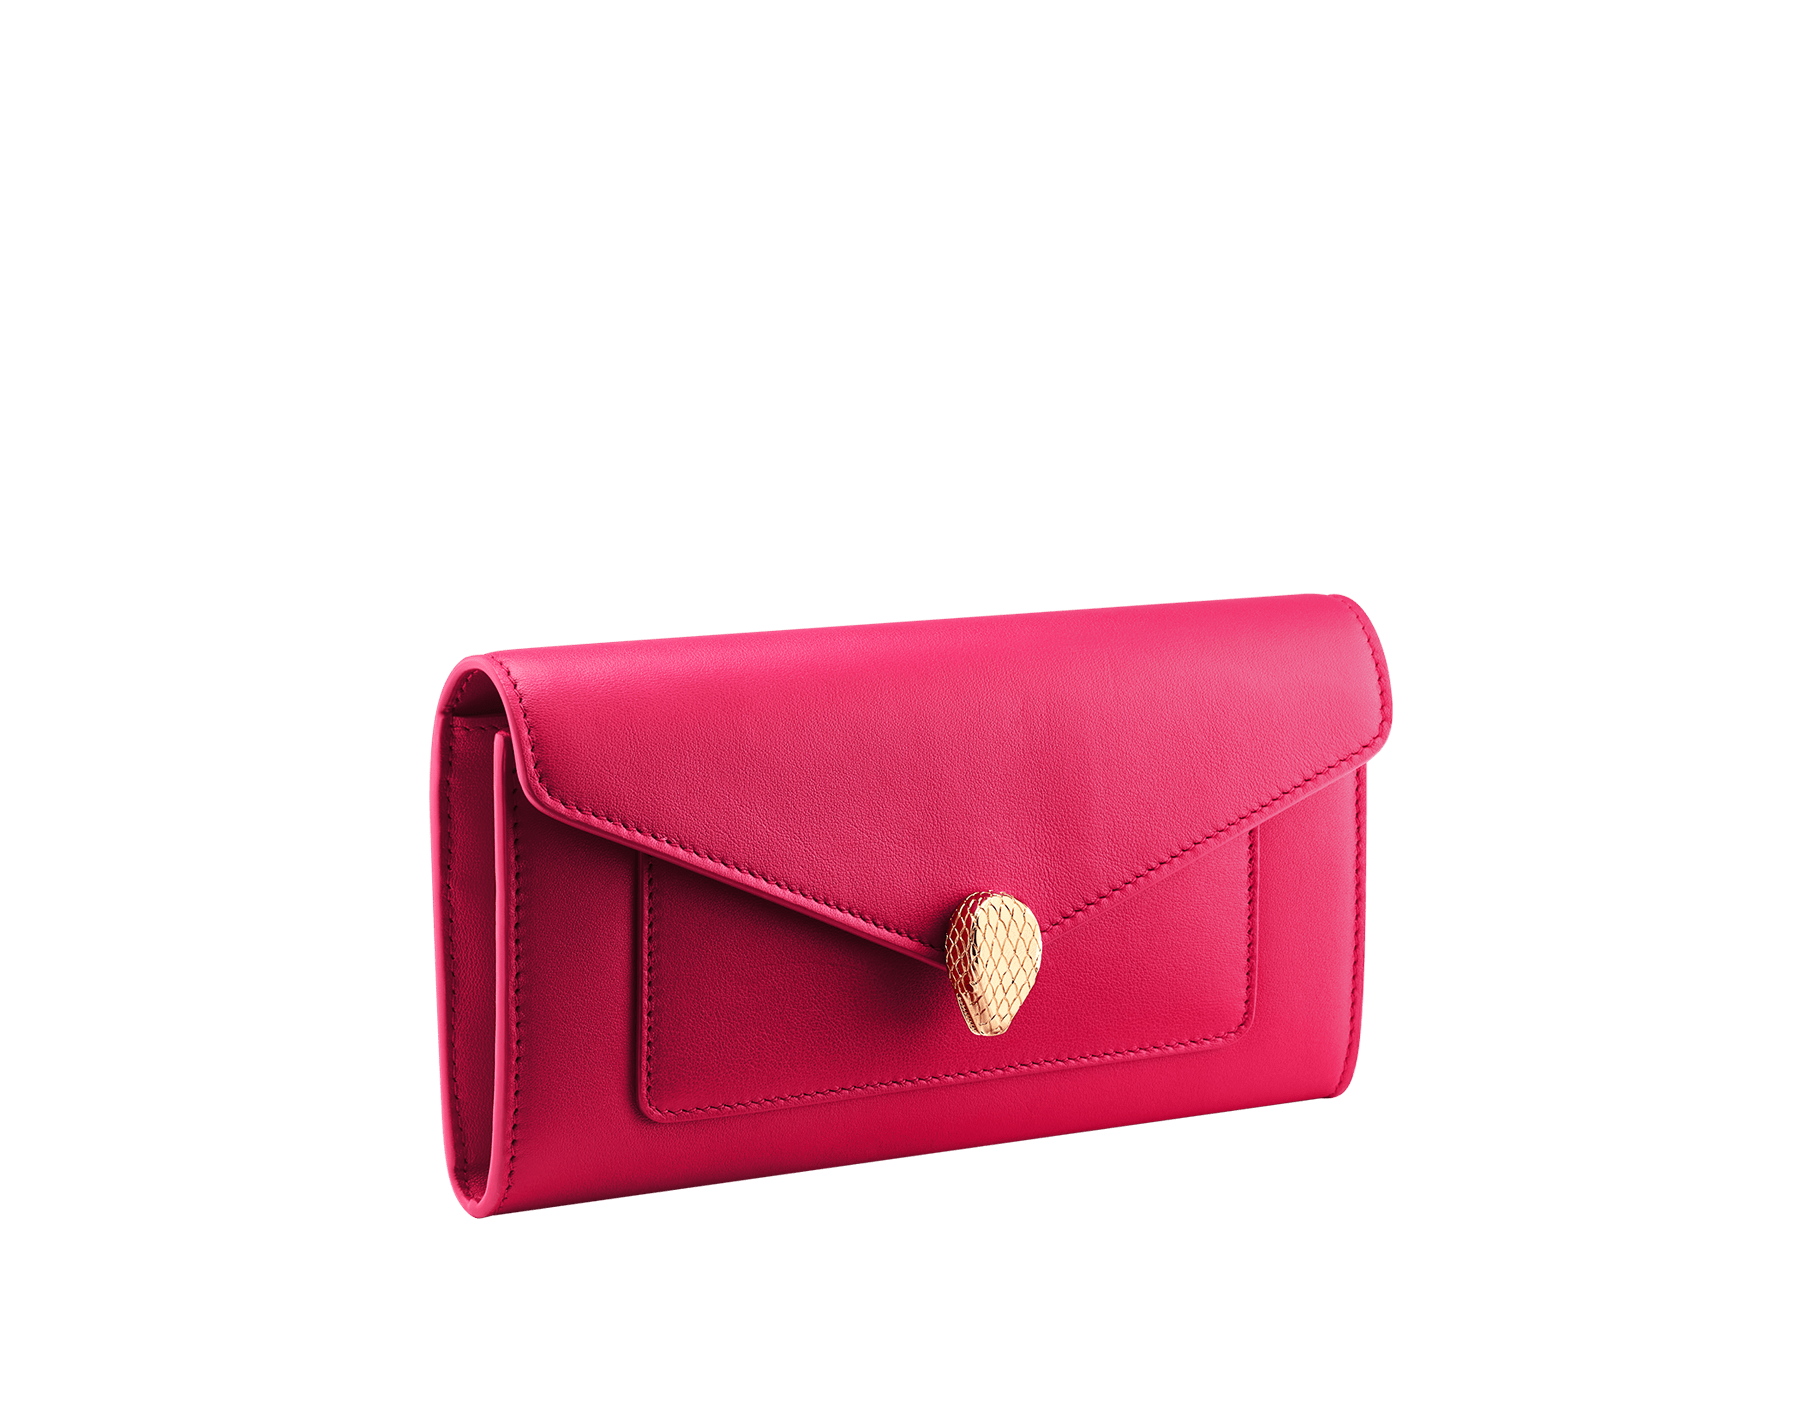 Serpenti Forever large wallet in Niagara sapphire blue calf leather with coral carnelian orange nappa leather interior. Captivating snakehead press button closure in light gold-plated brass finished with red enamel eyes. SEA-6CCWALLET image 1